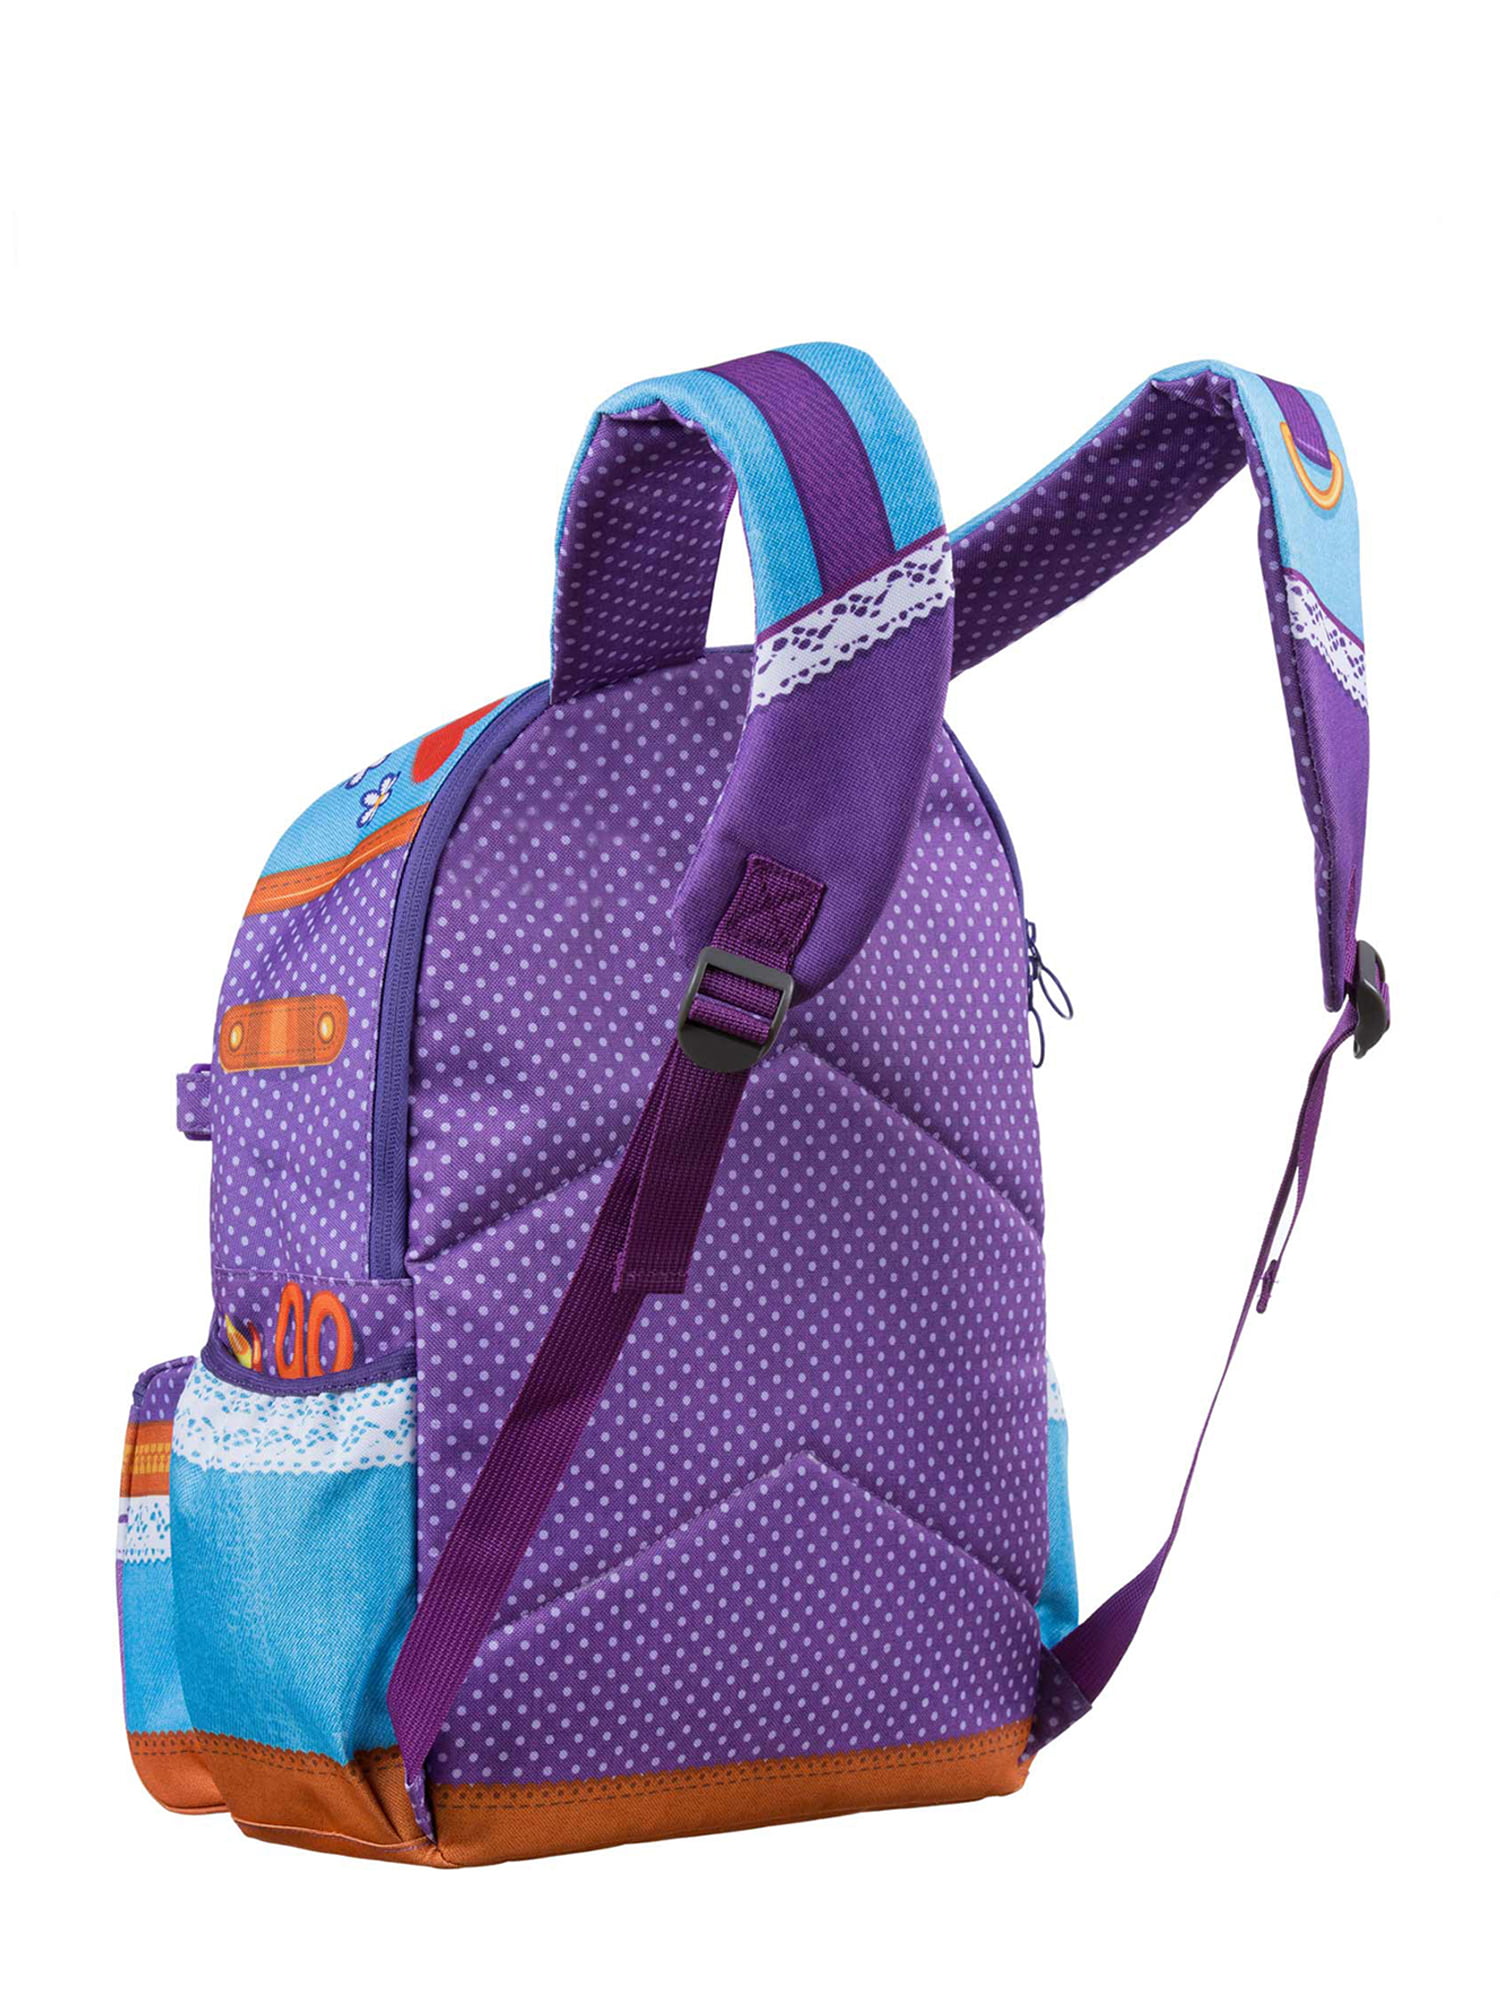 Zipit Adventure, Backpack & Lunch Bag, Young Fashion Designer, Girl's, Size: Medium, Purple